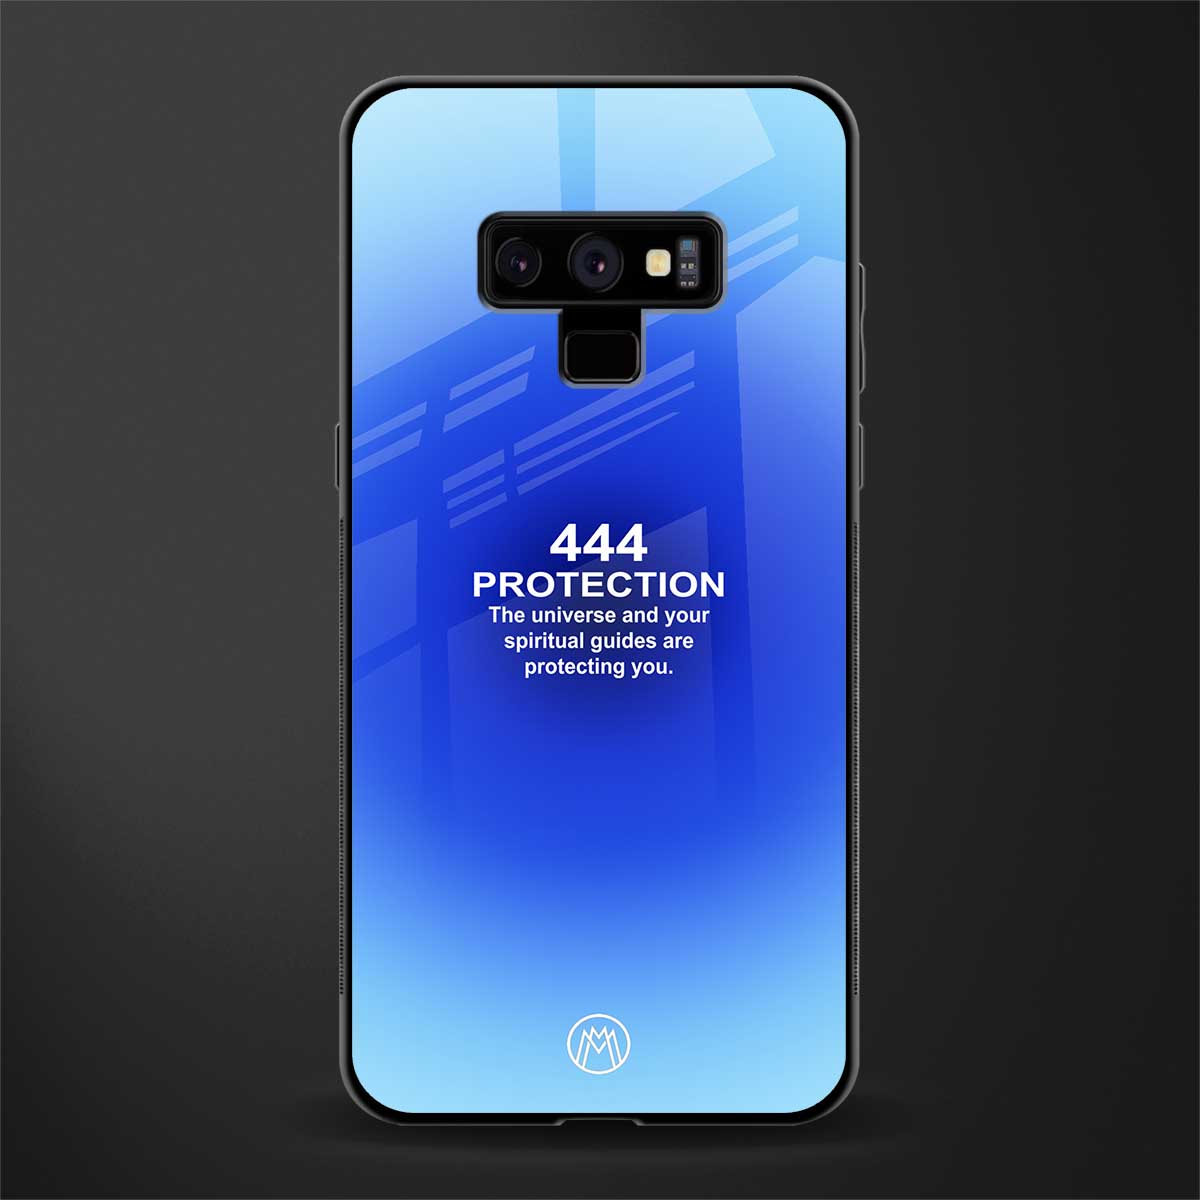 444 protection glass case for samsung galaxy note 9 image